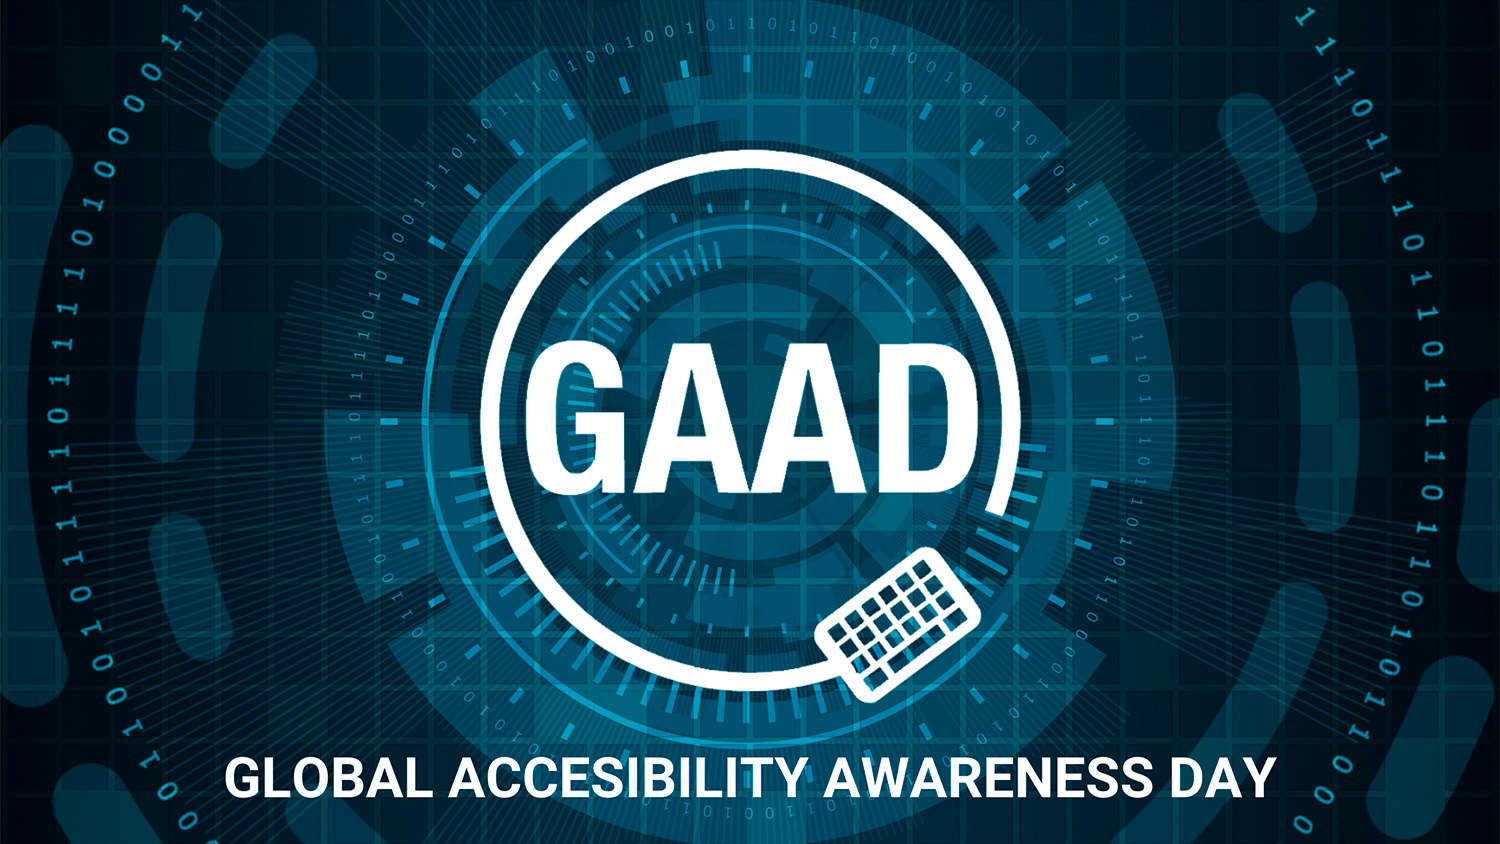 Cartell del GAAD (Global Accessibility Awareness Day)